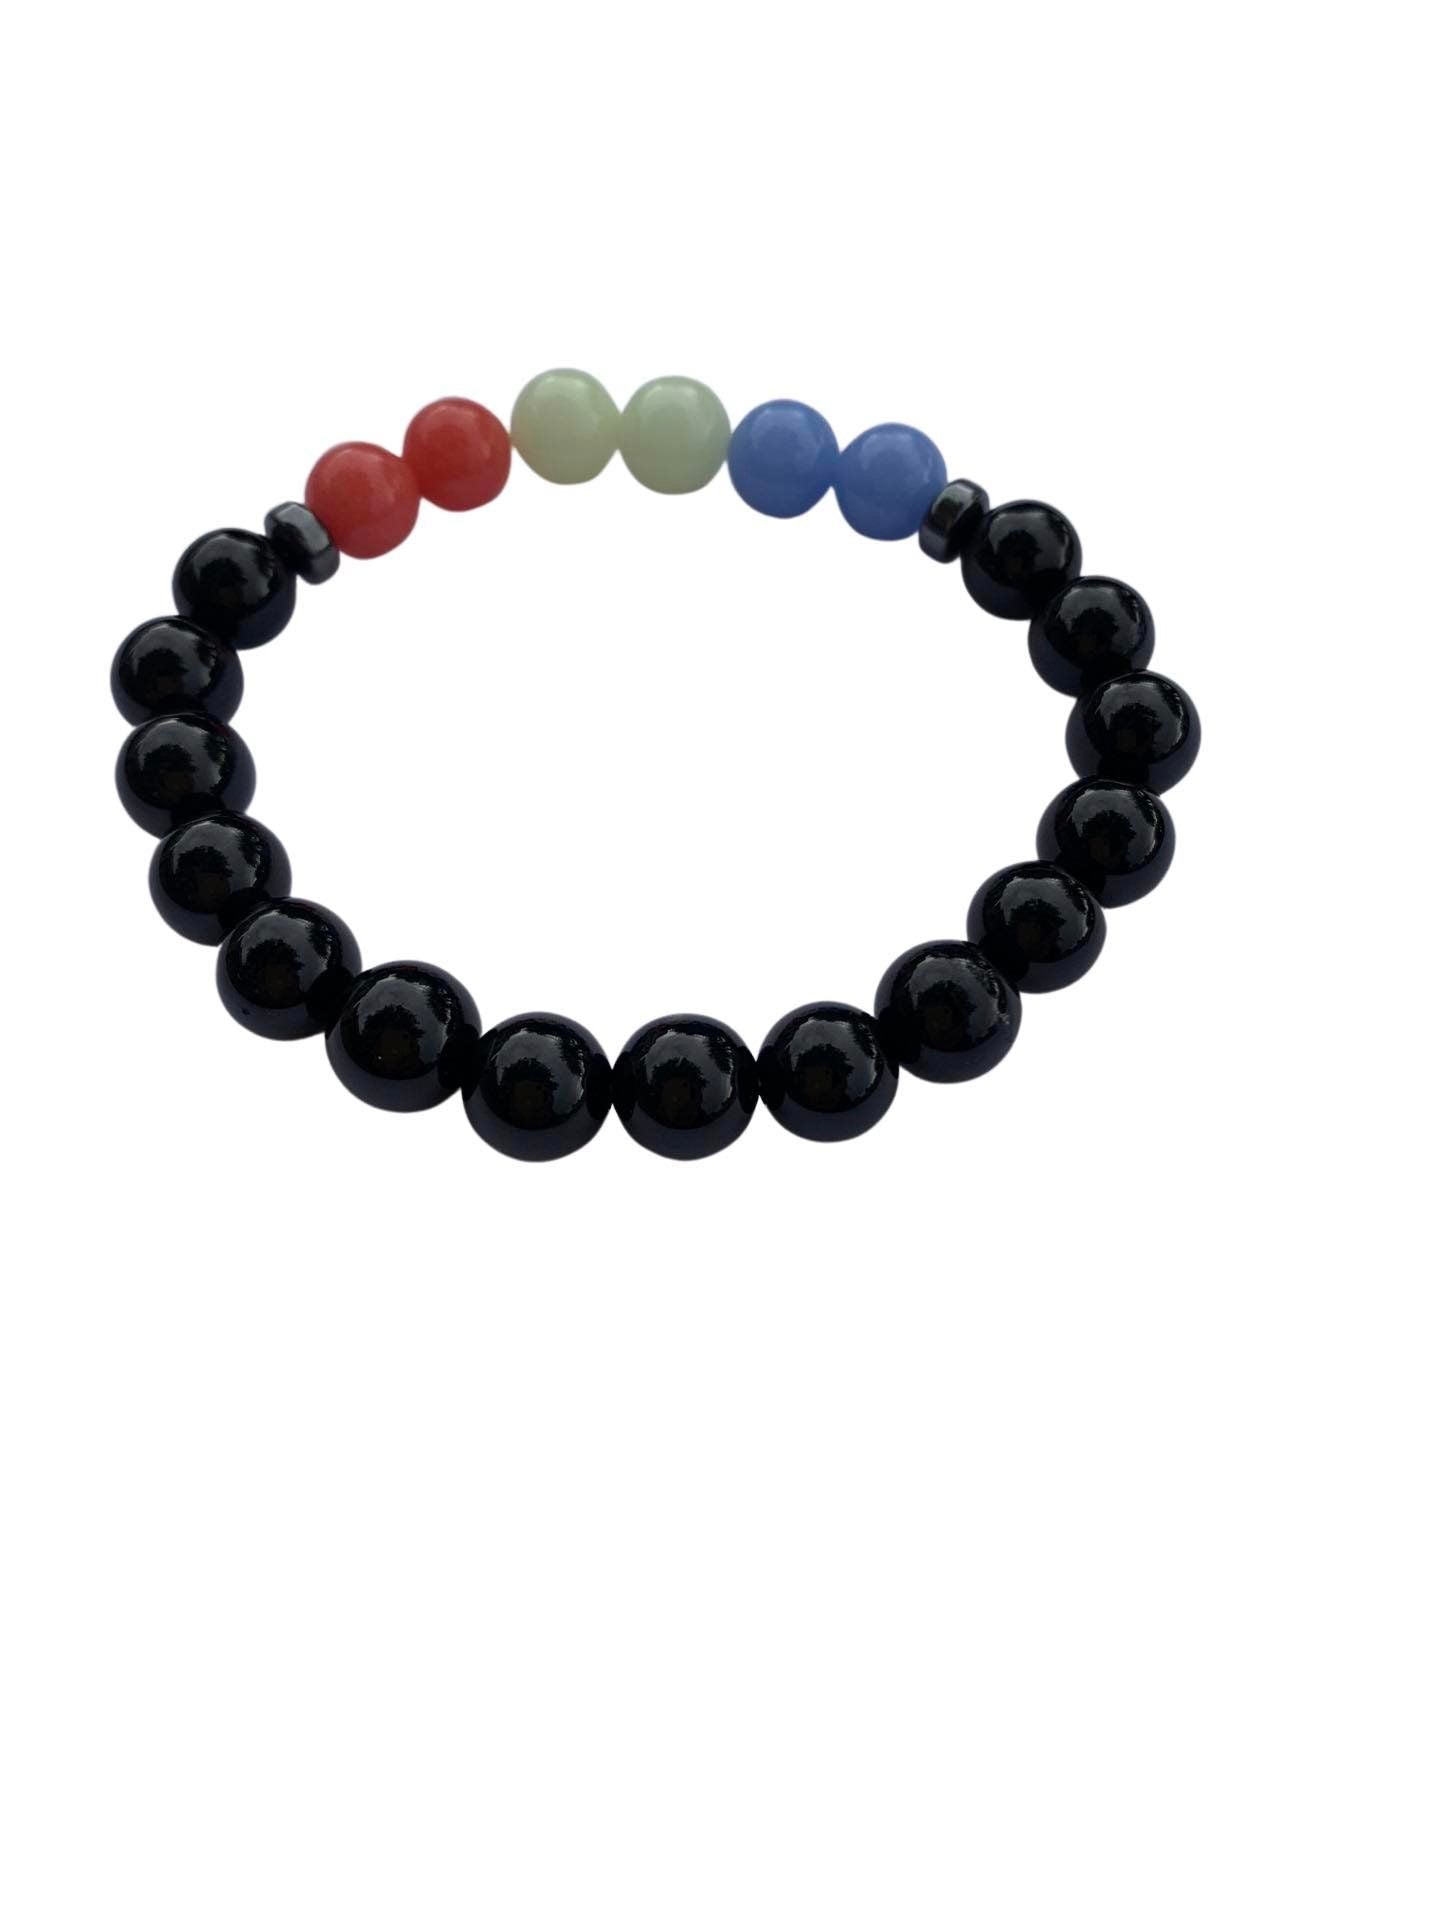 Aragonite Multi with Onyx Bracelet 8 mm Round Beads - Naturally Glows in the Dark